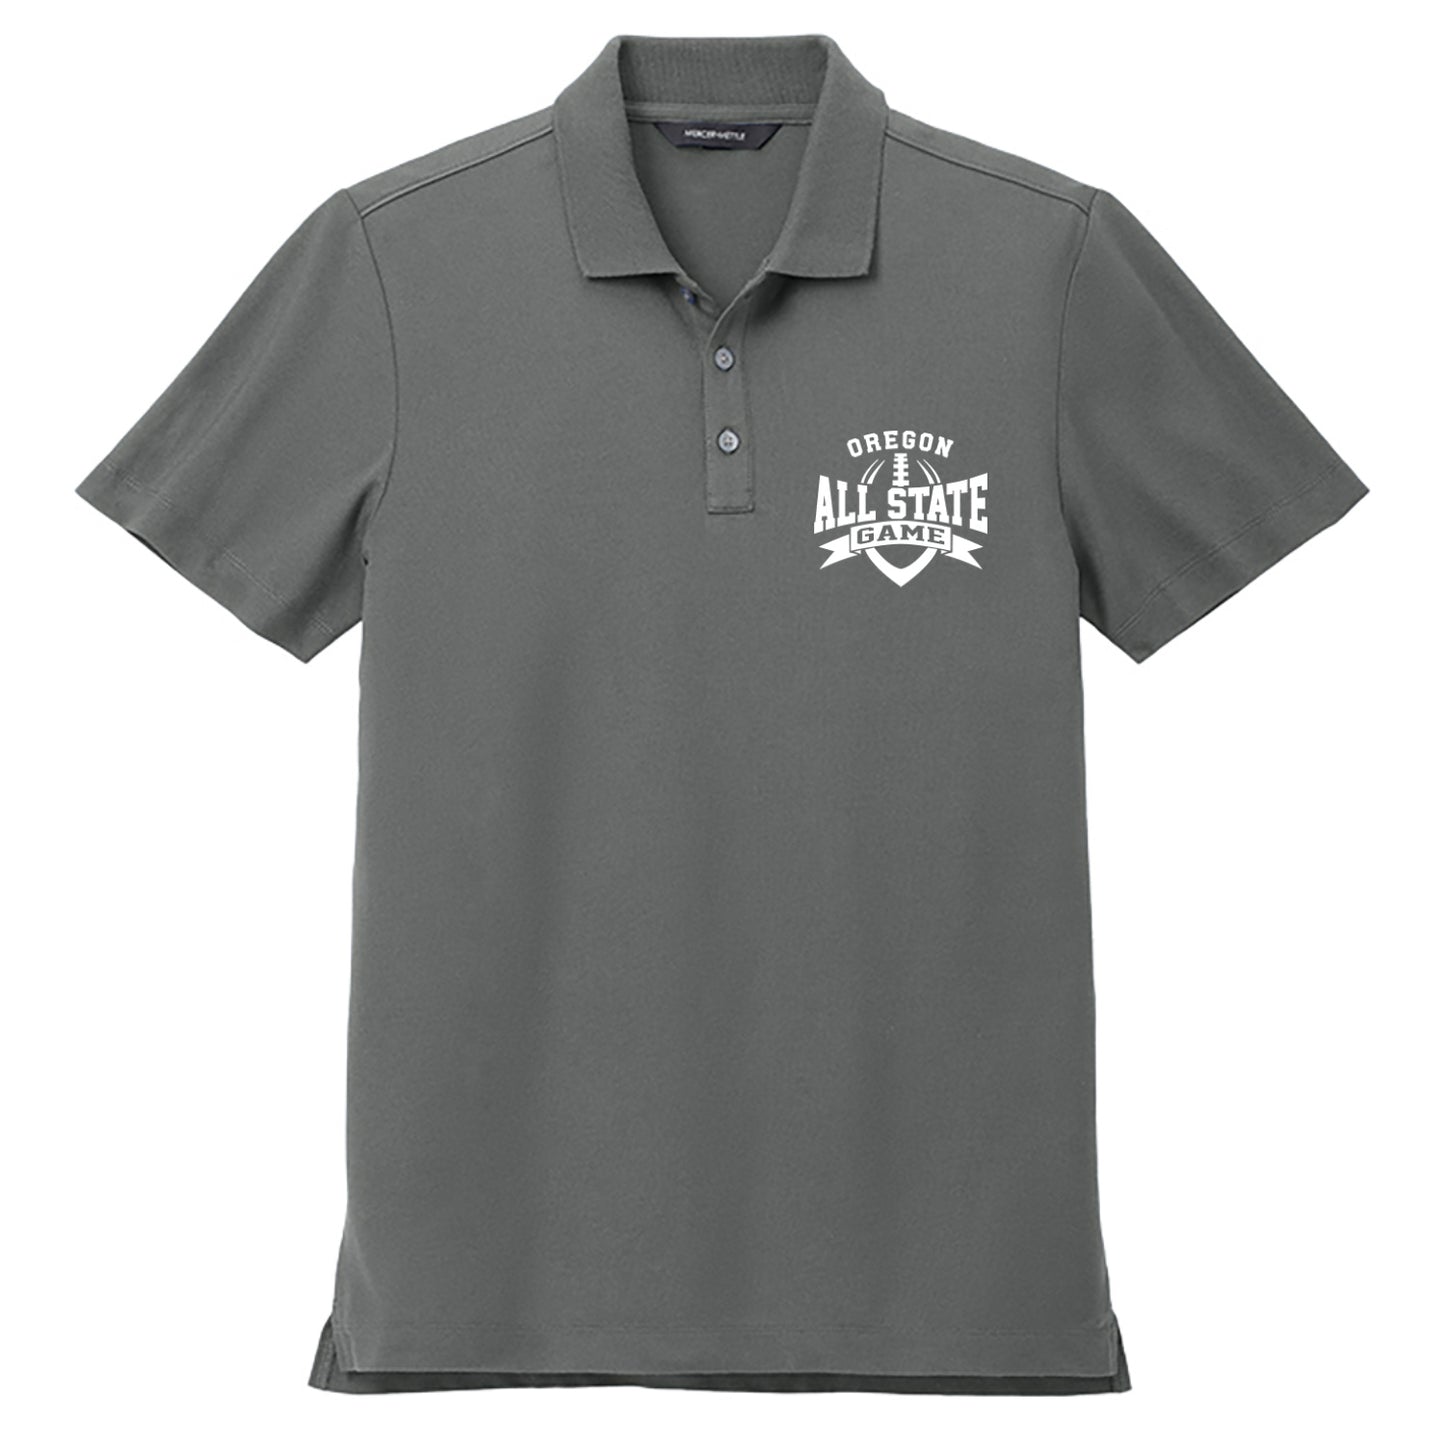 Oregon All State - Men's Stretch Pique Polo - 2 colors available